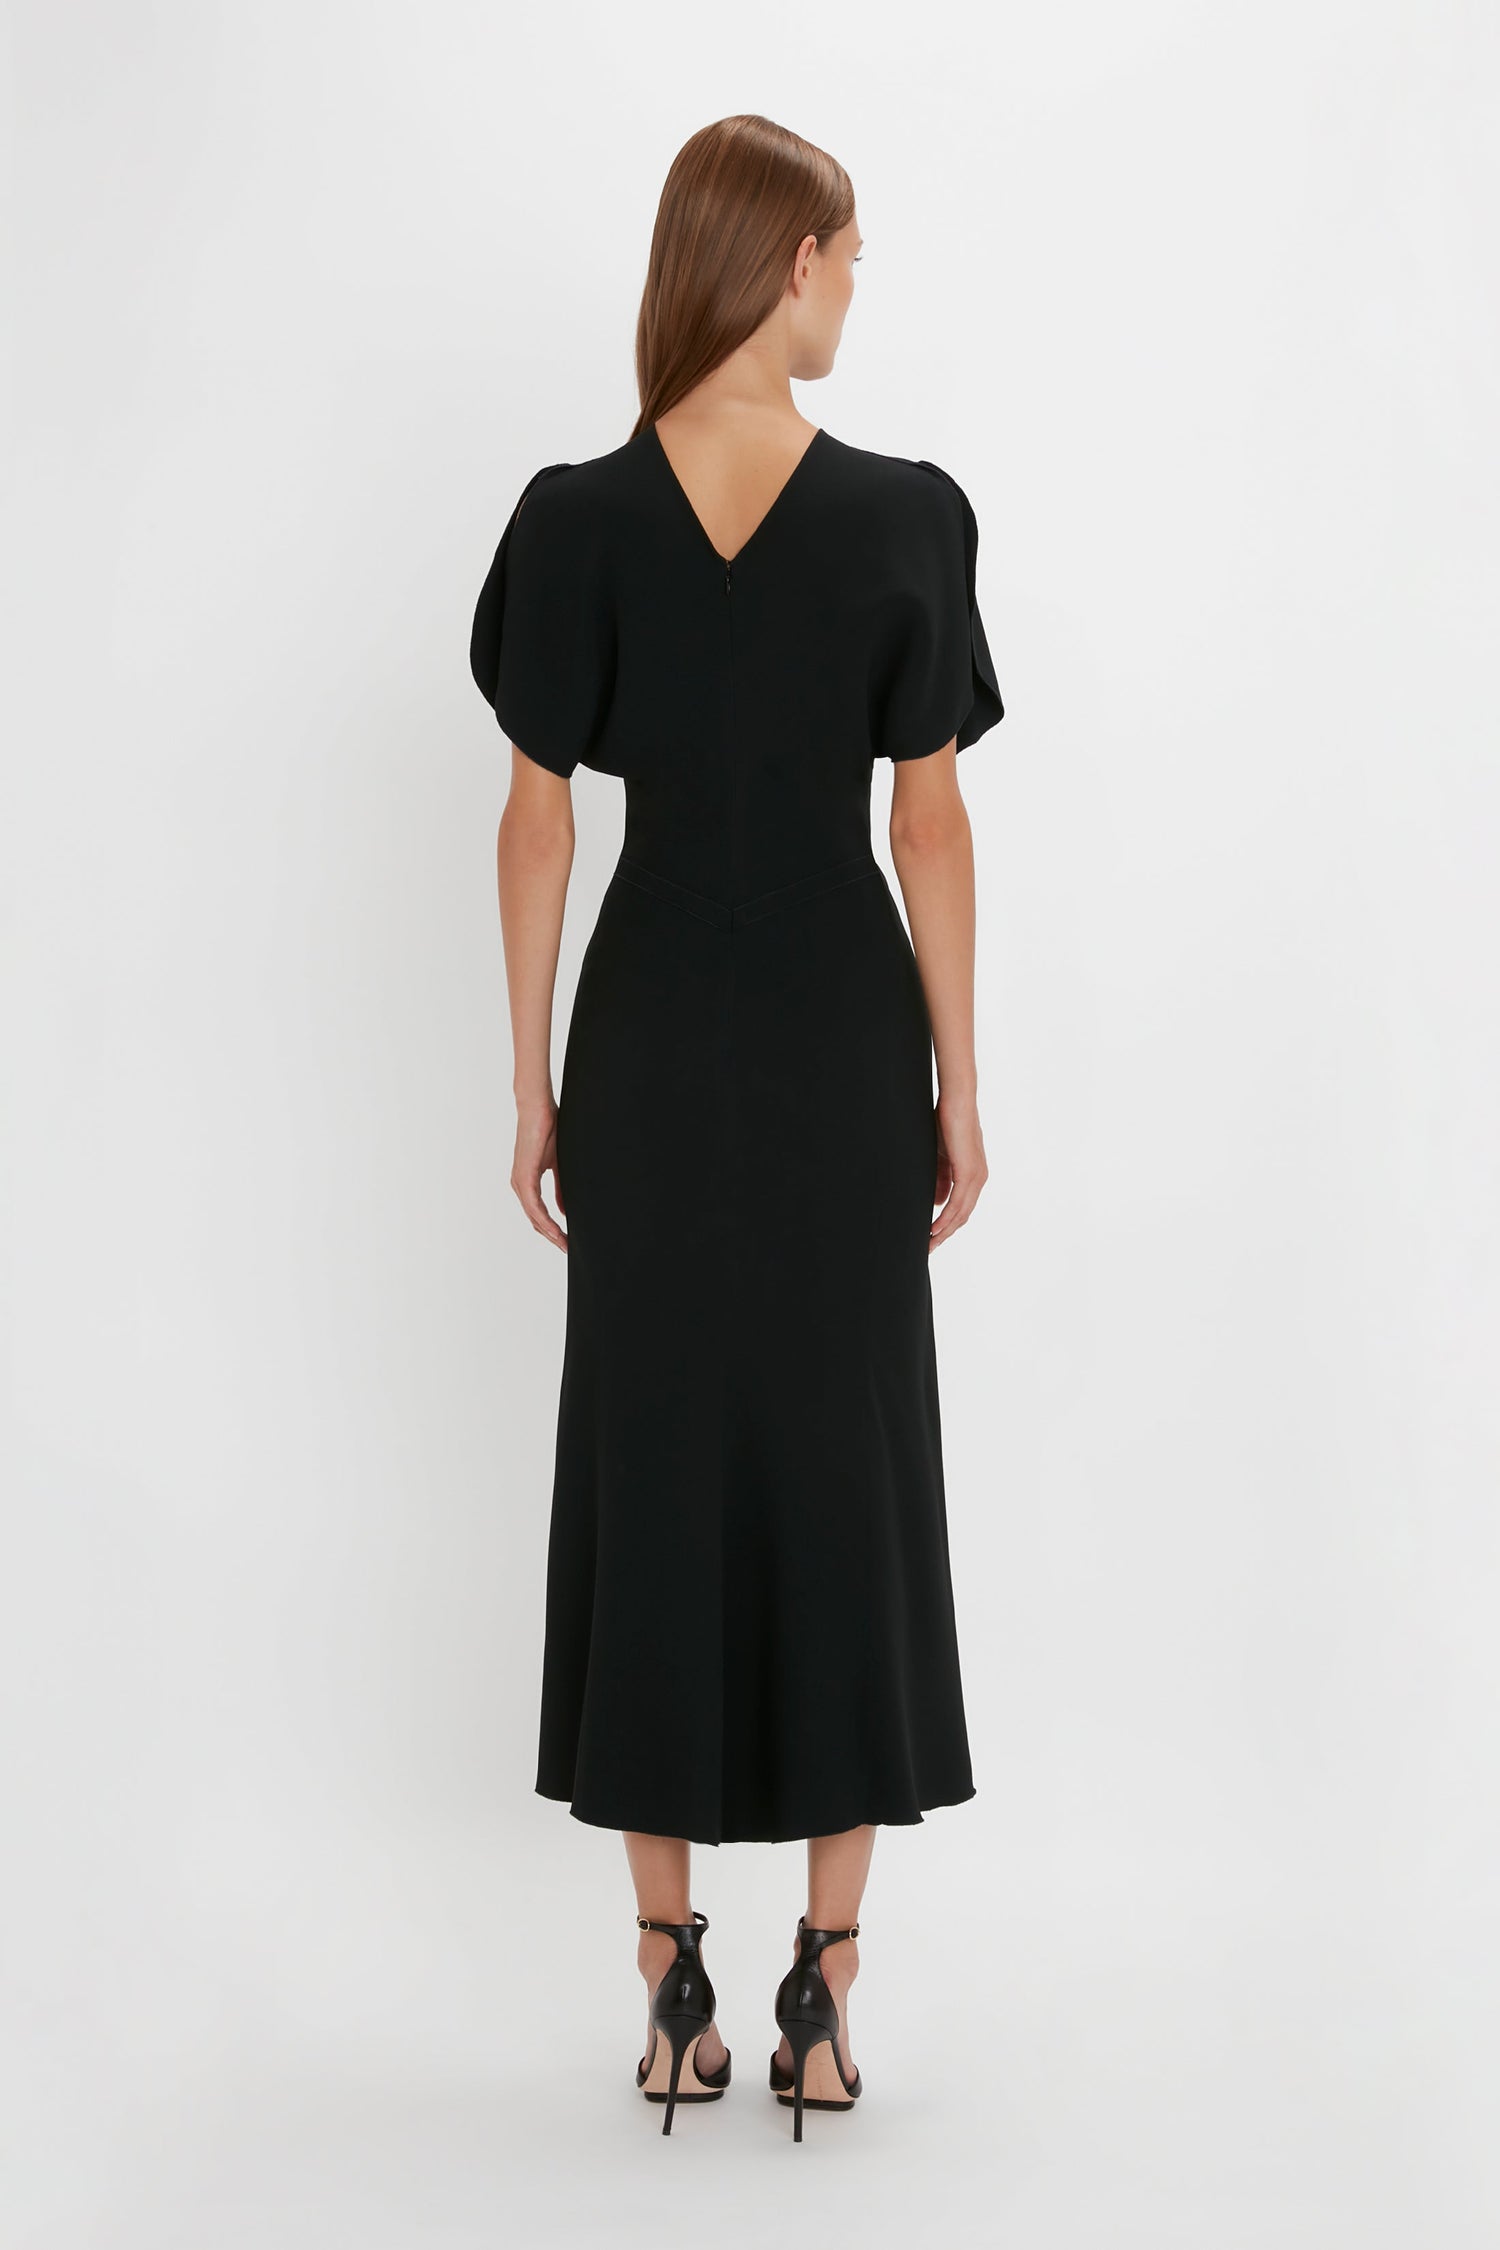 Woman standing with her back to the camera, wearing a Victoria Beckham Gathered Waist Midi Dress in Black with short sleeves and v-back, paired with black pointy toe stilettos on a white backdrop.